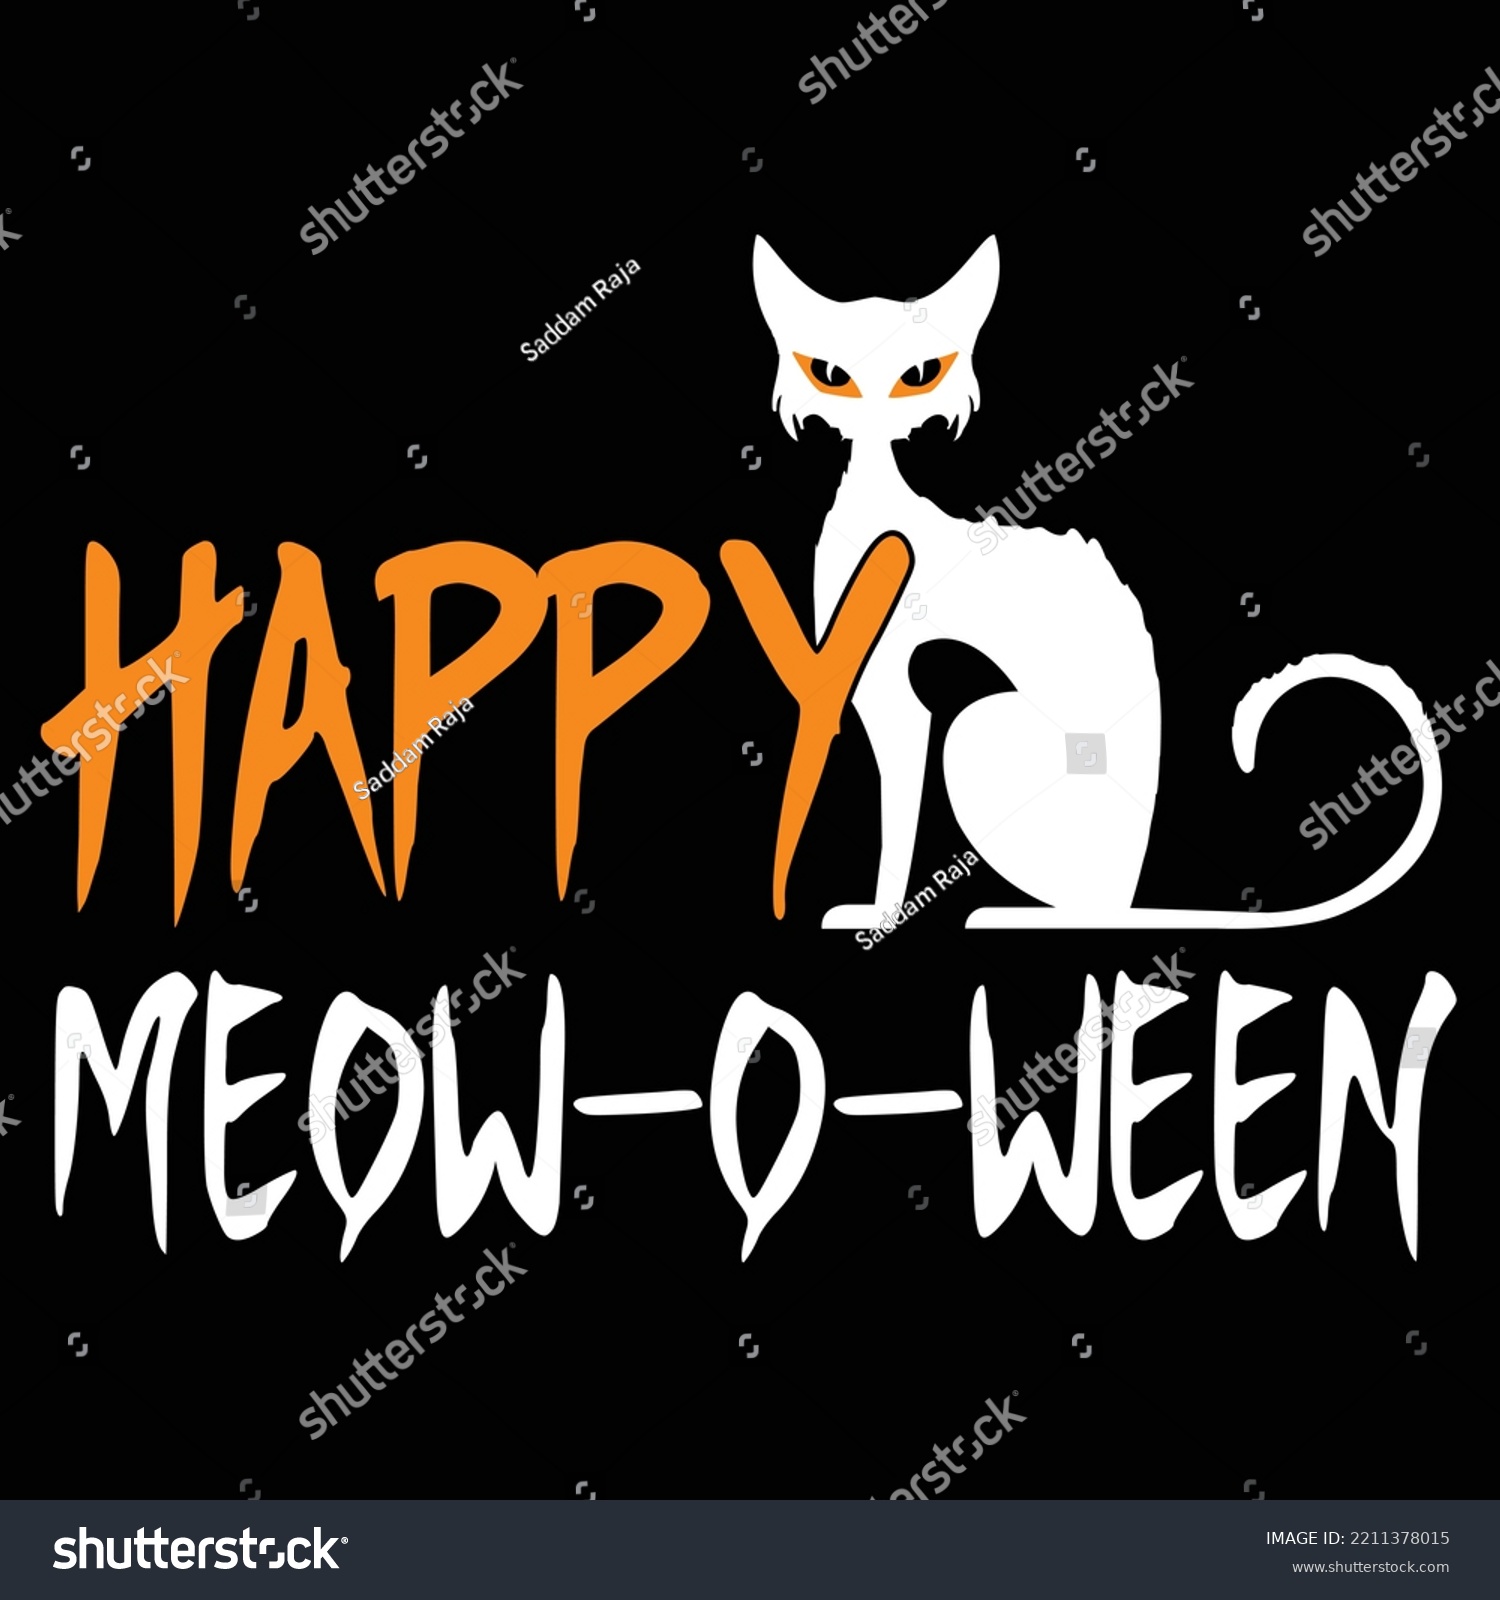 SVG of Happy meow-o-ween SVG. Halloween Day Special T-shirt Typography Design. Best for T-Shirt, mag, sticker, wall mat, etc. svg